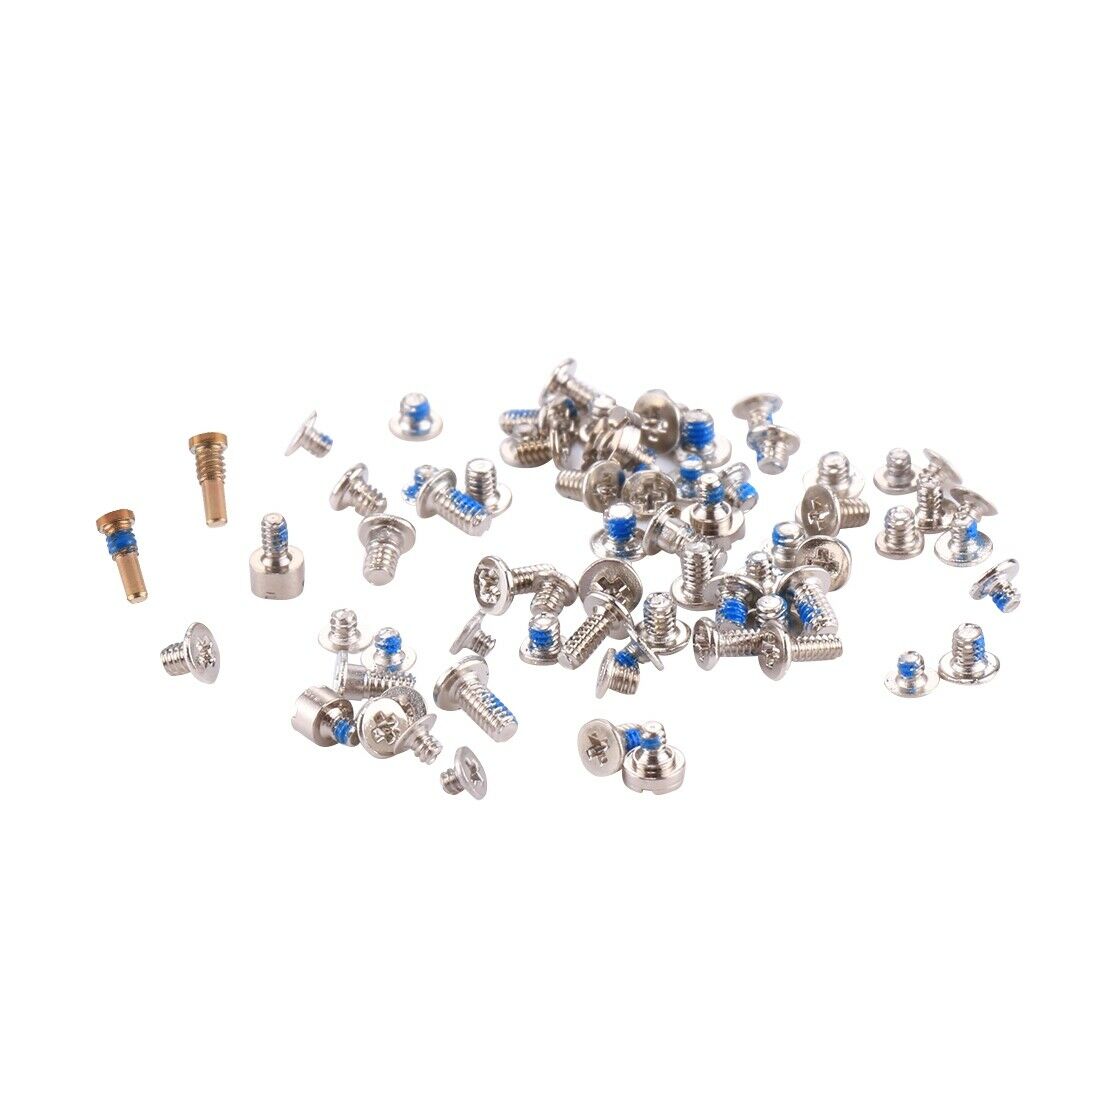 Apple iPhone 8 Full Screw Set including the 2 Gold Bottom Screws for [product_price] - First Help Tech